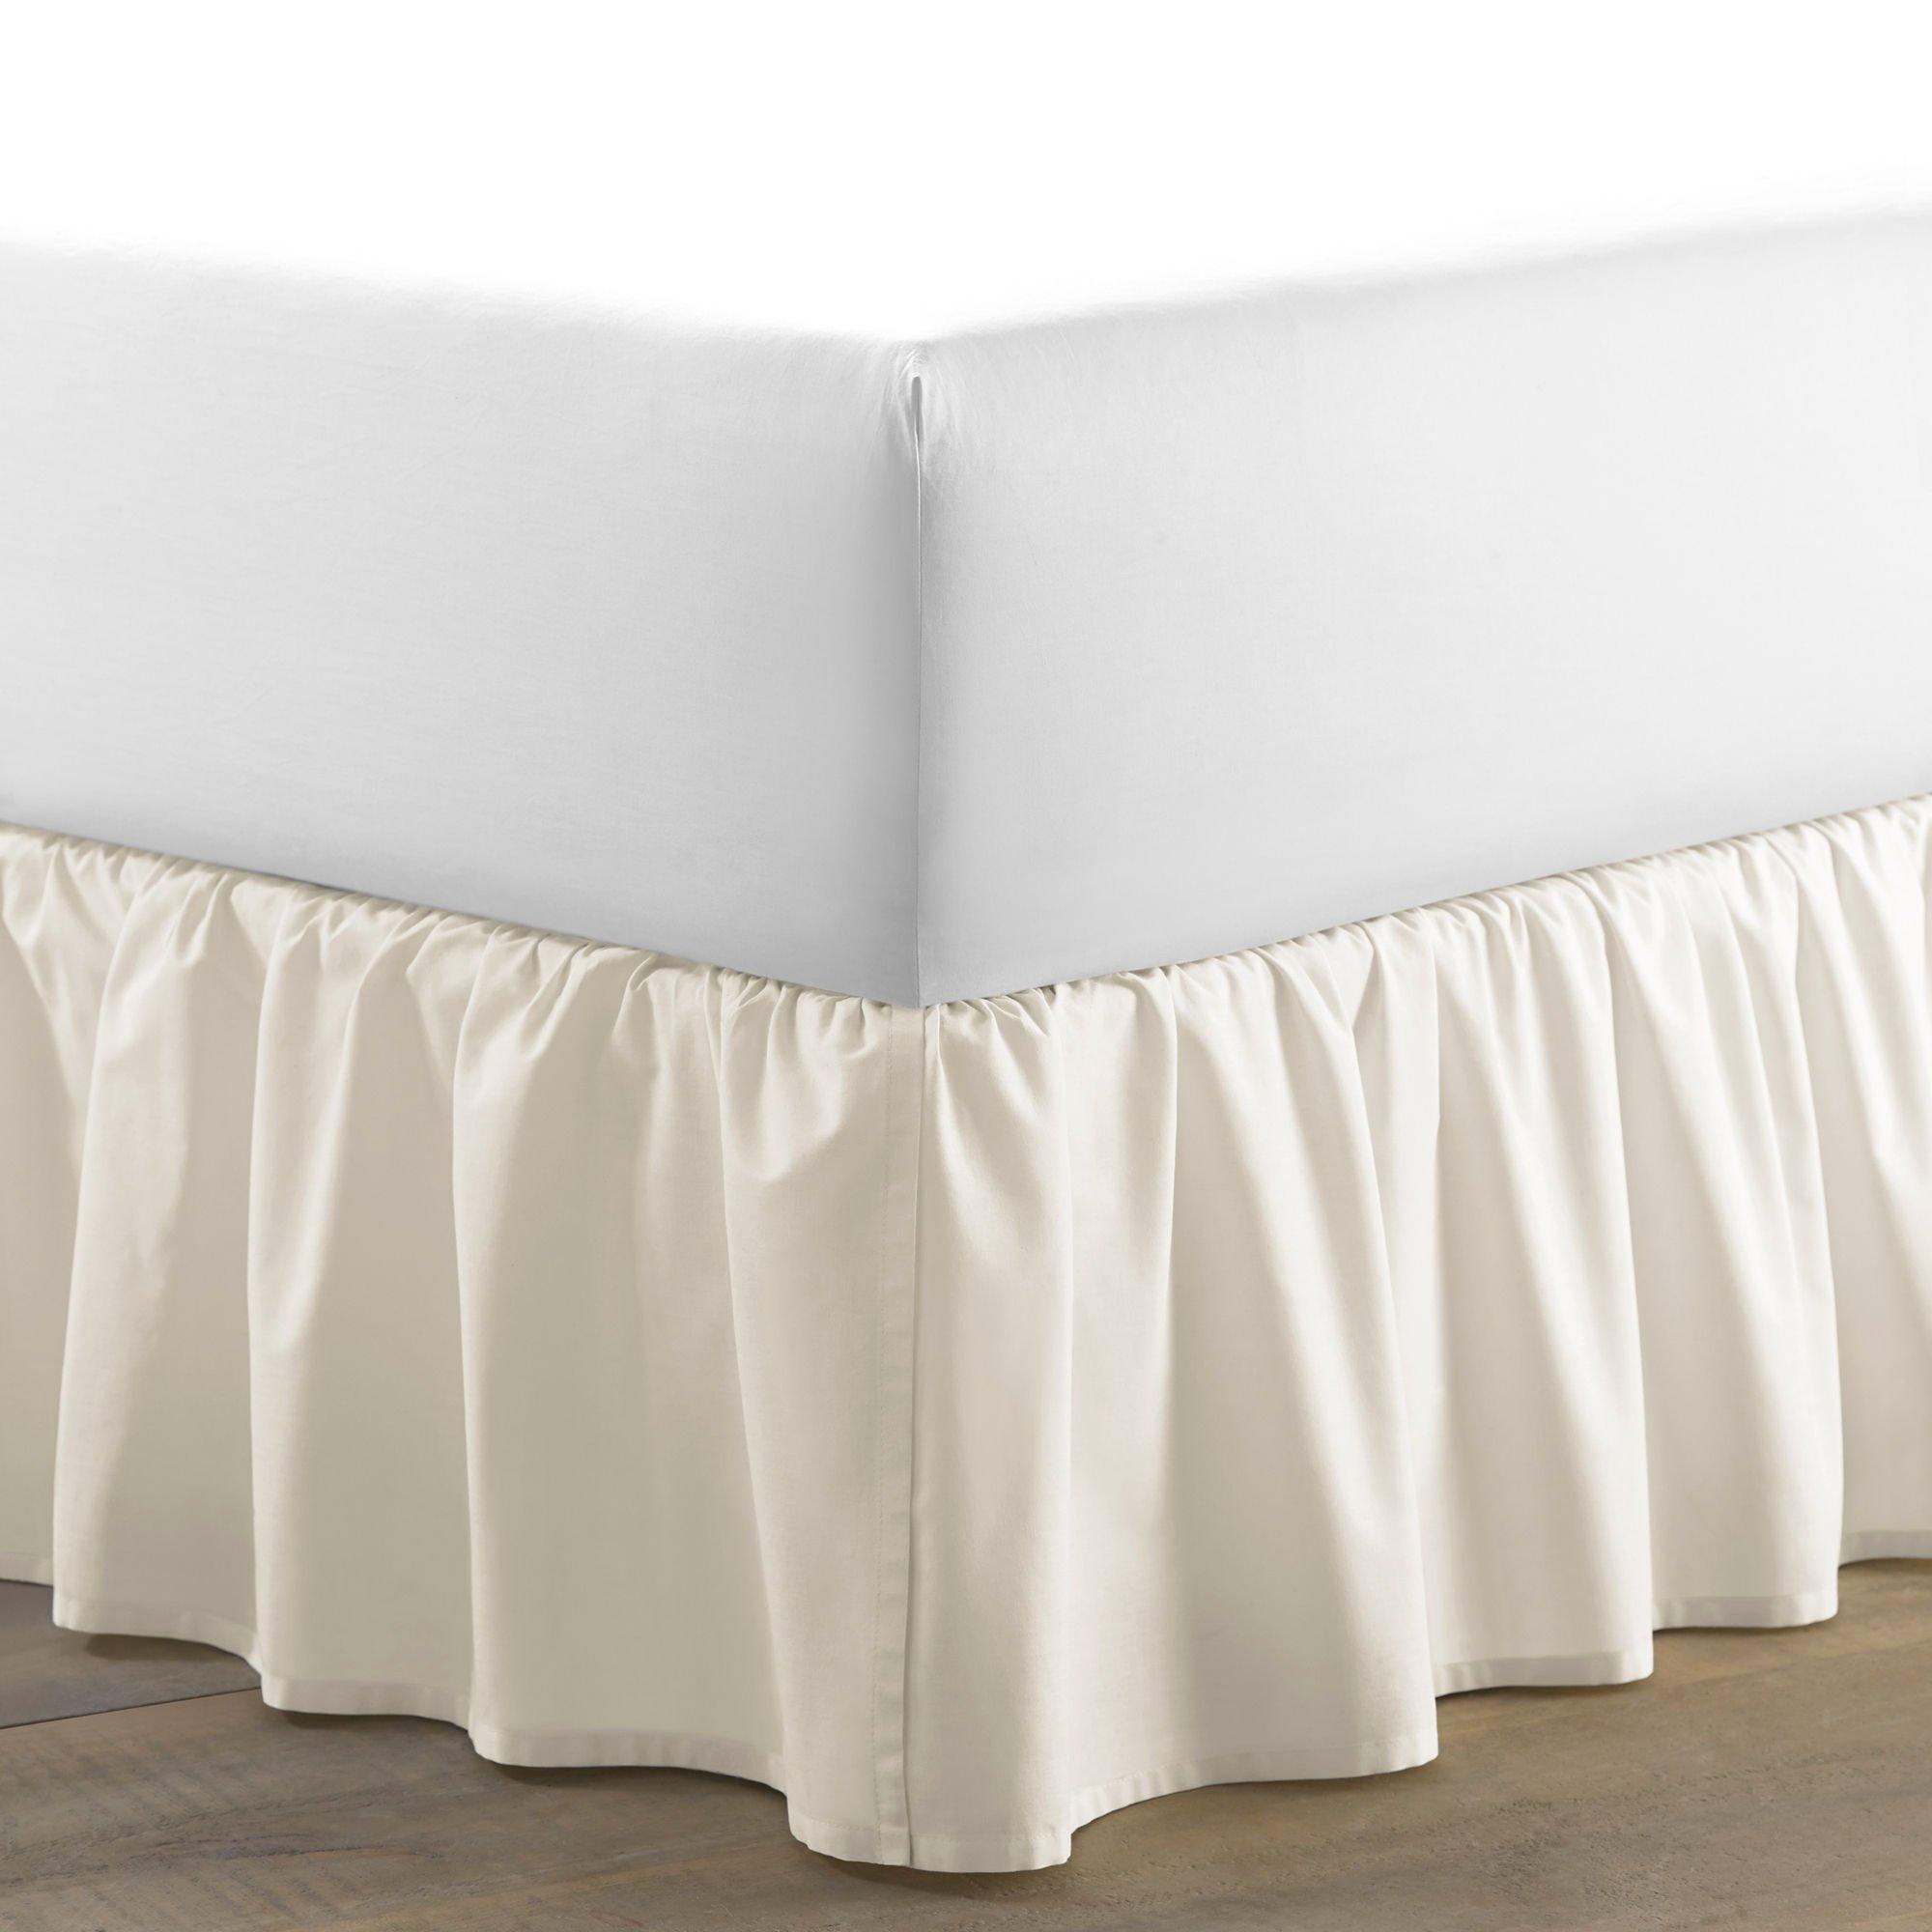 Photos - Bed Linen Laura Ashley Solid Ruffle Bed Skirt